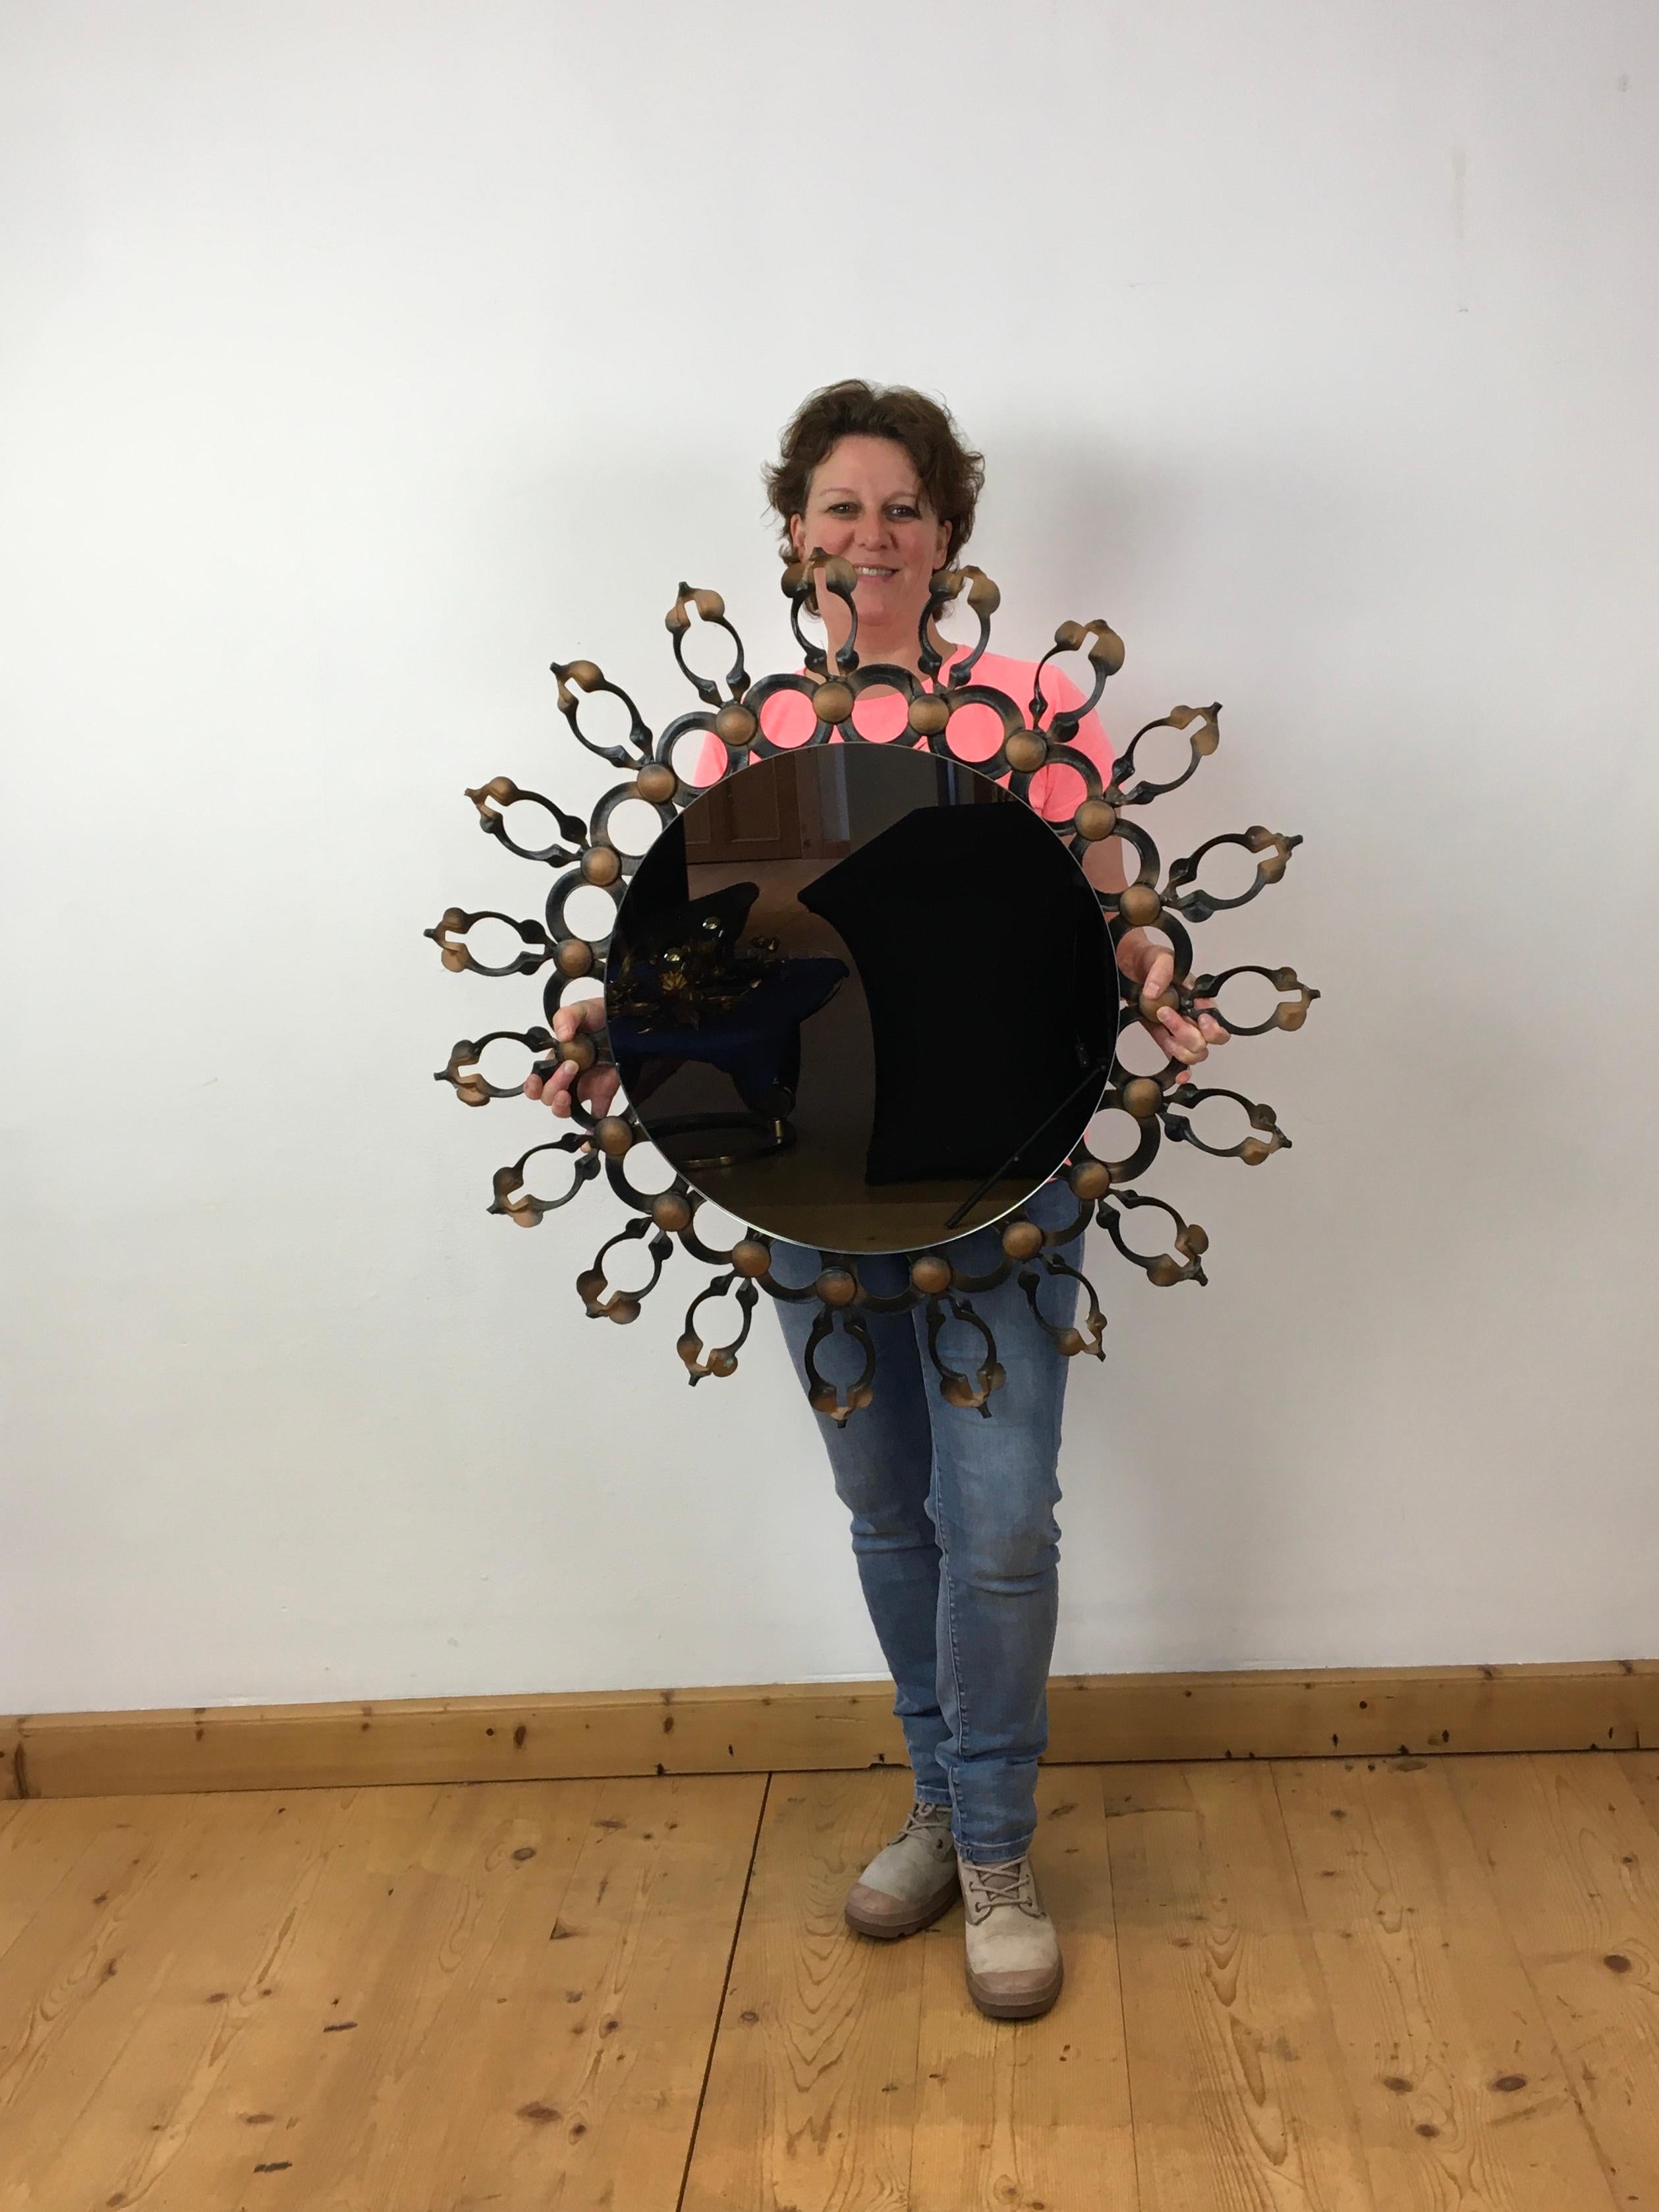 Large brutalist sunburst mirror - round wall mirror of the 1960s. 
A Mid-Century brutalist iron mirror. 
Hand-made / hand-crafted black - painted iron frame with golden - copper colored accents. 

This 1960s round wall mirror which will look